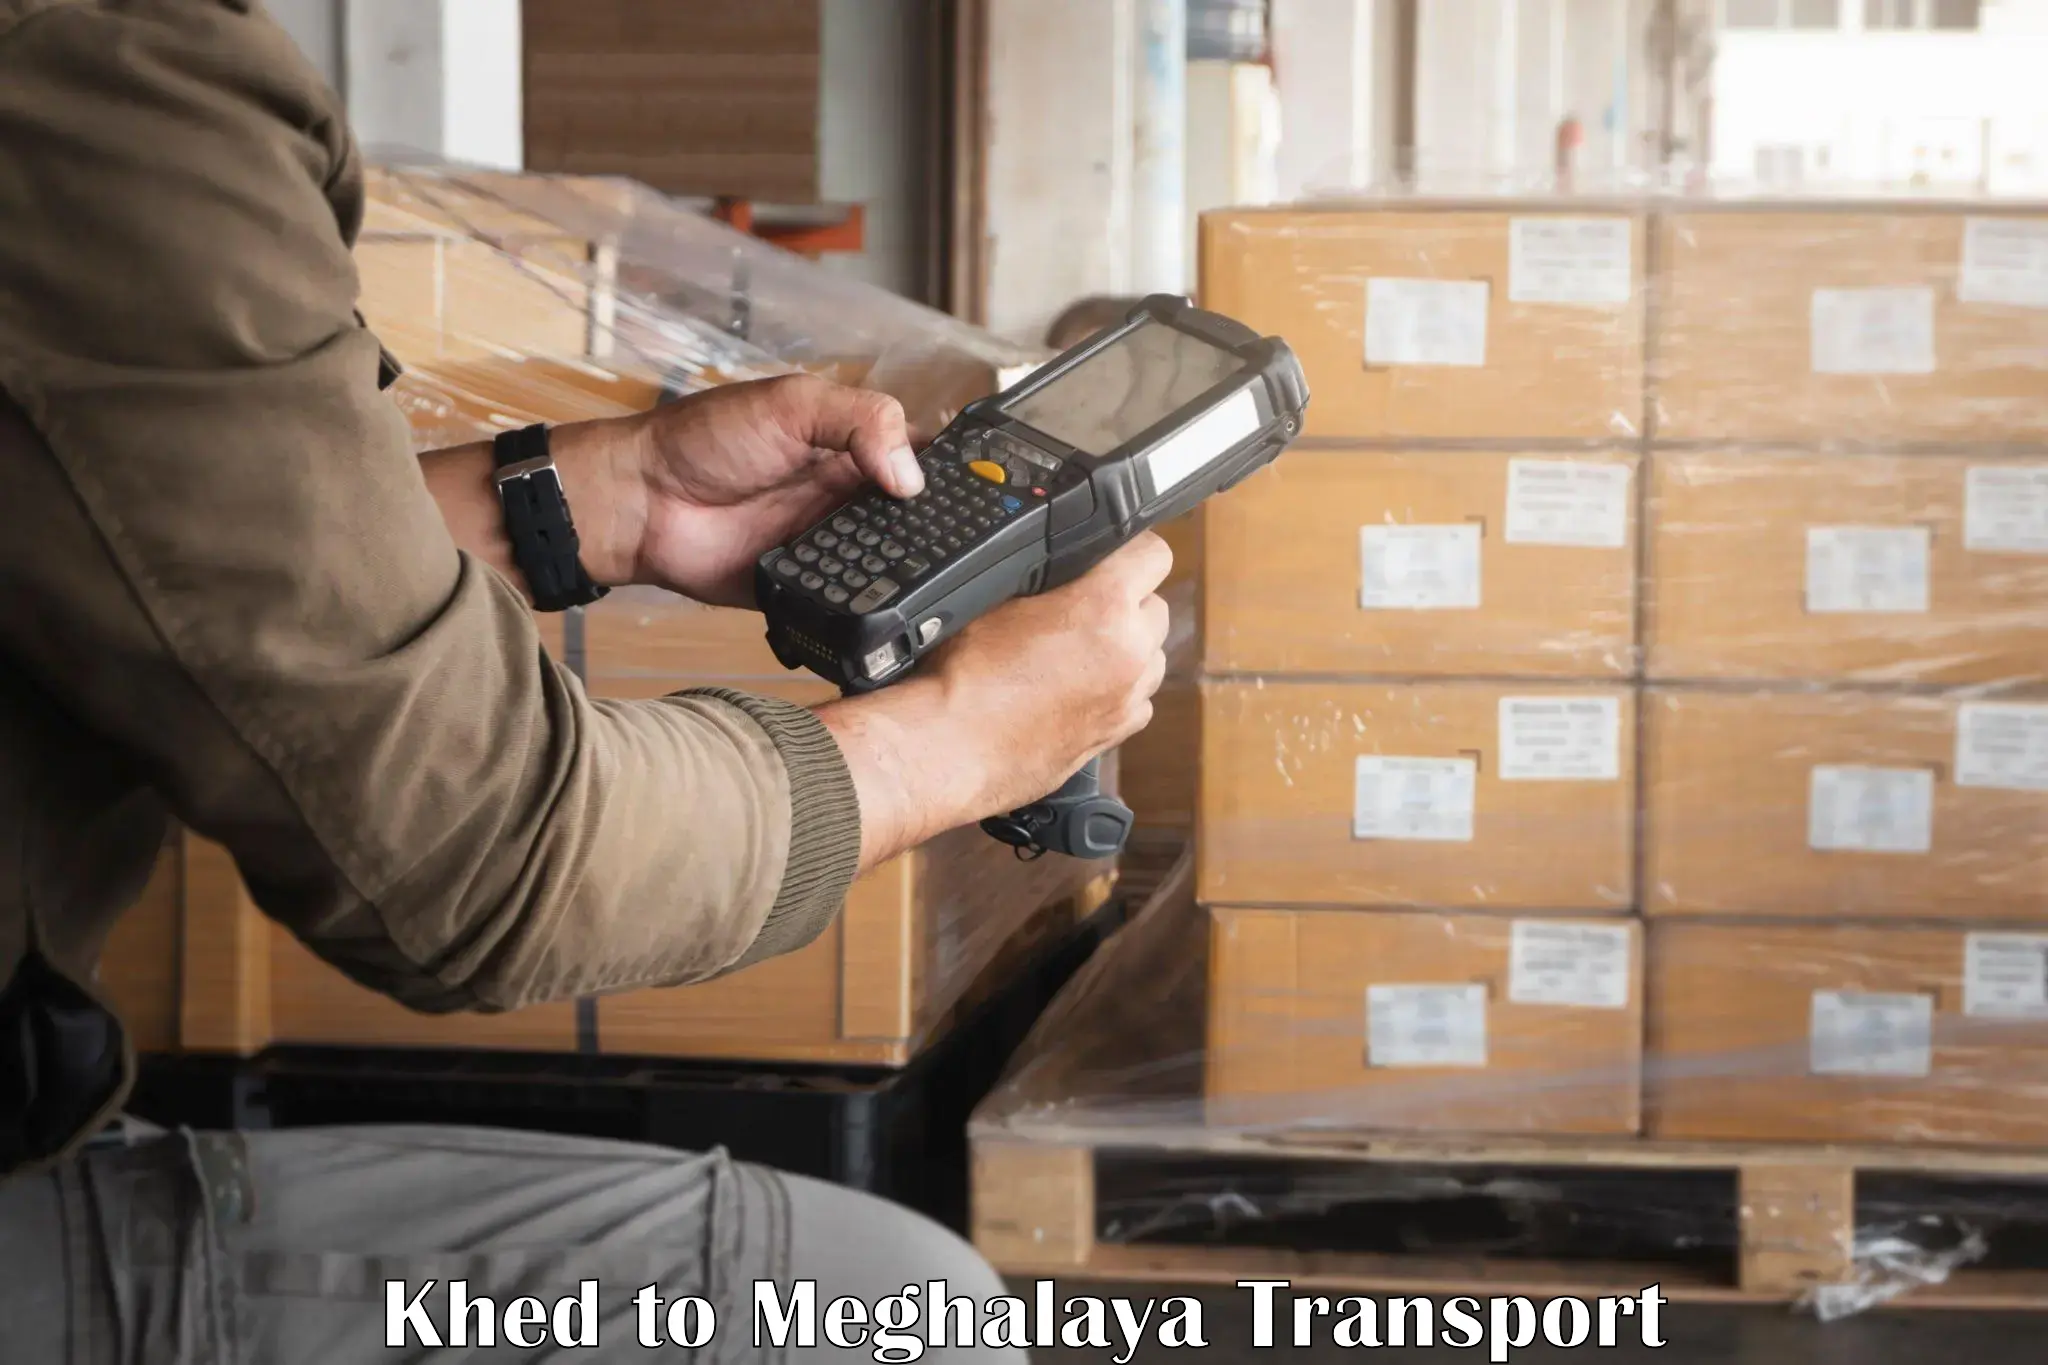 Truck transport companies in India Khed to Meghalaya